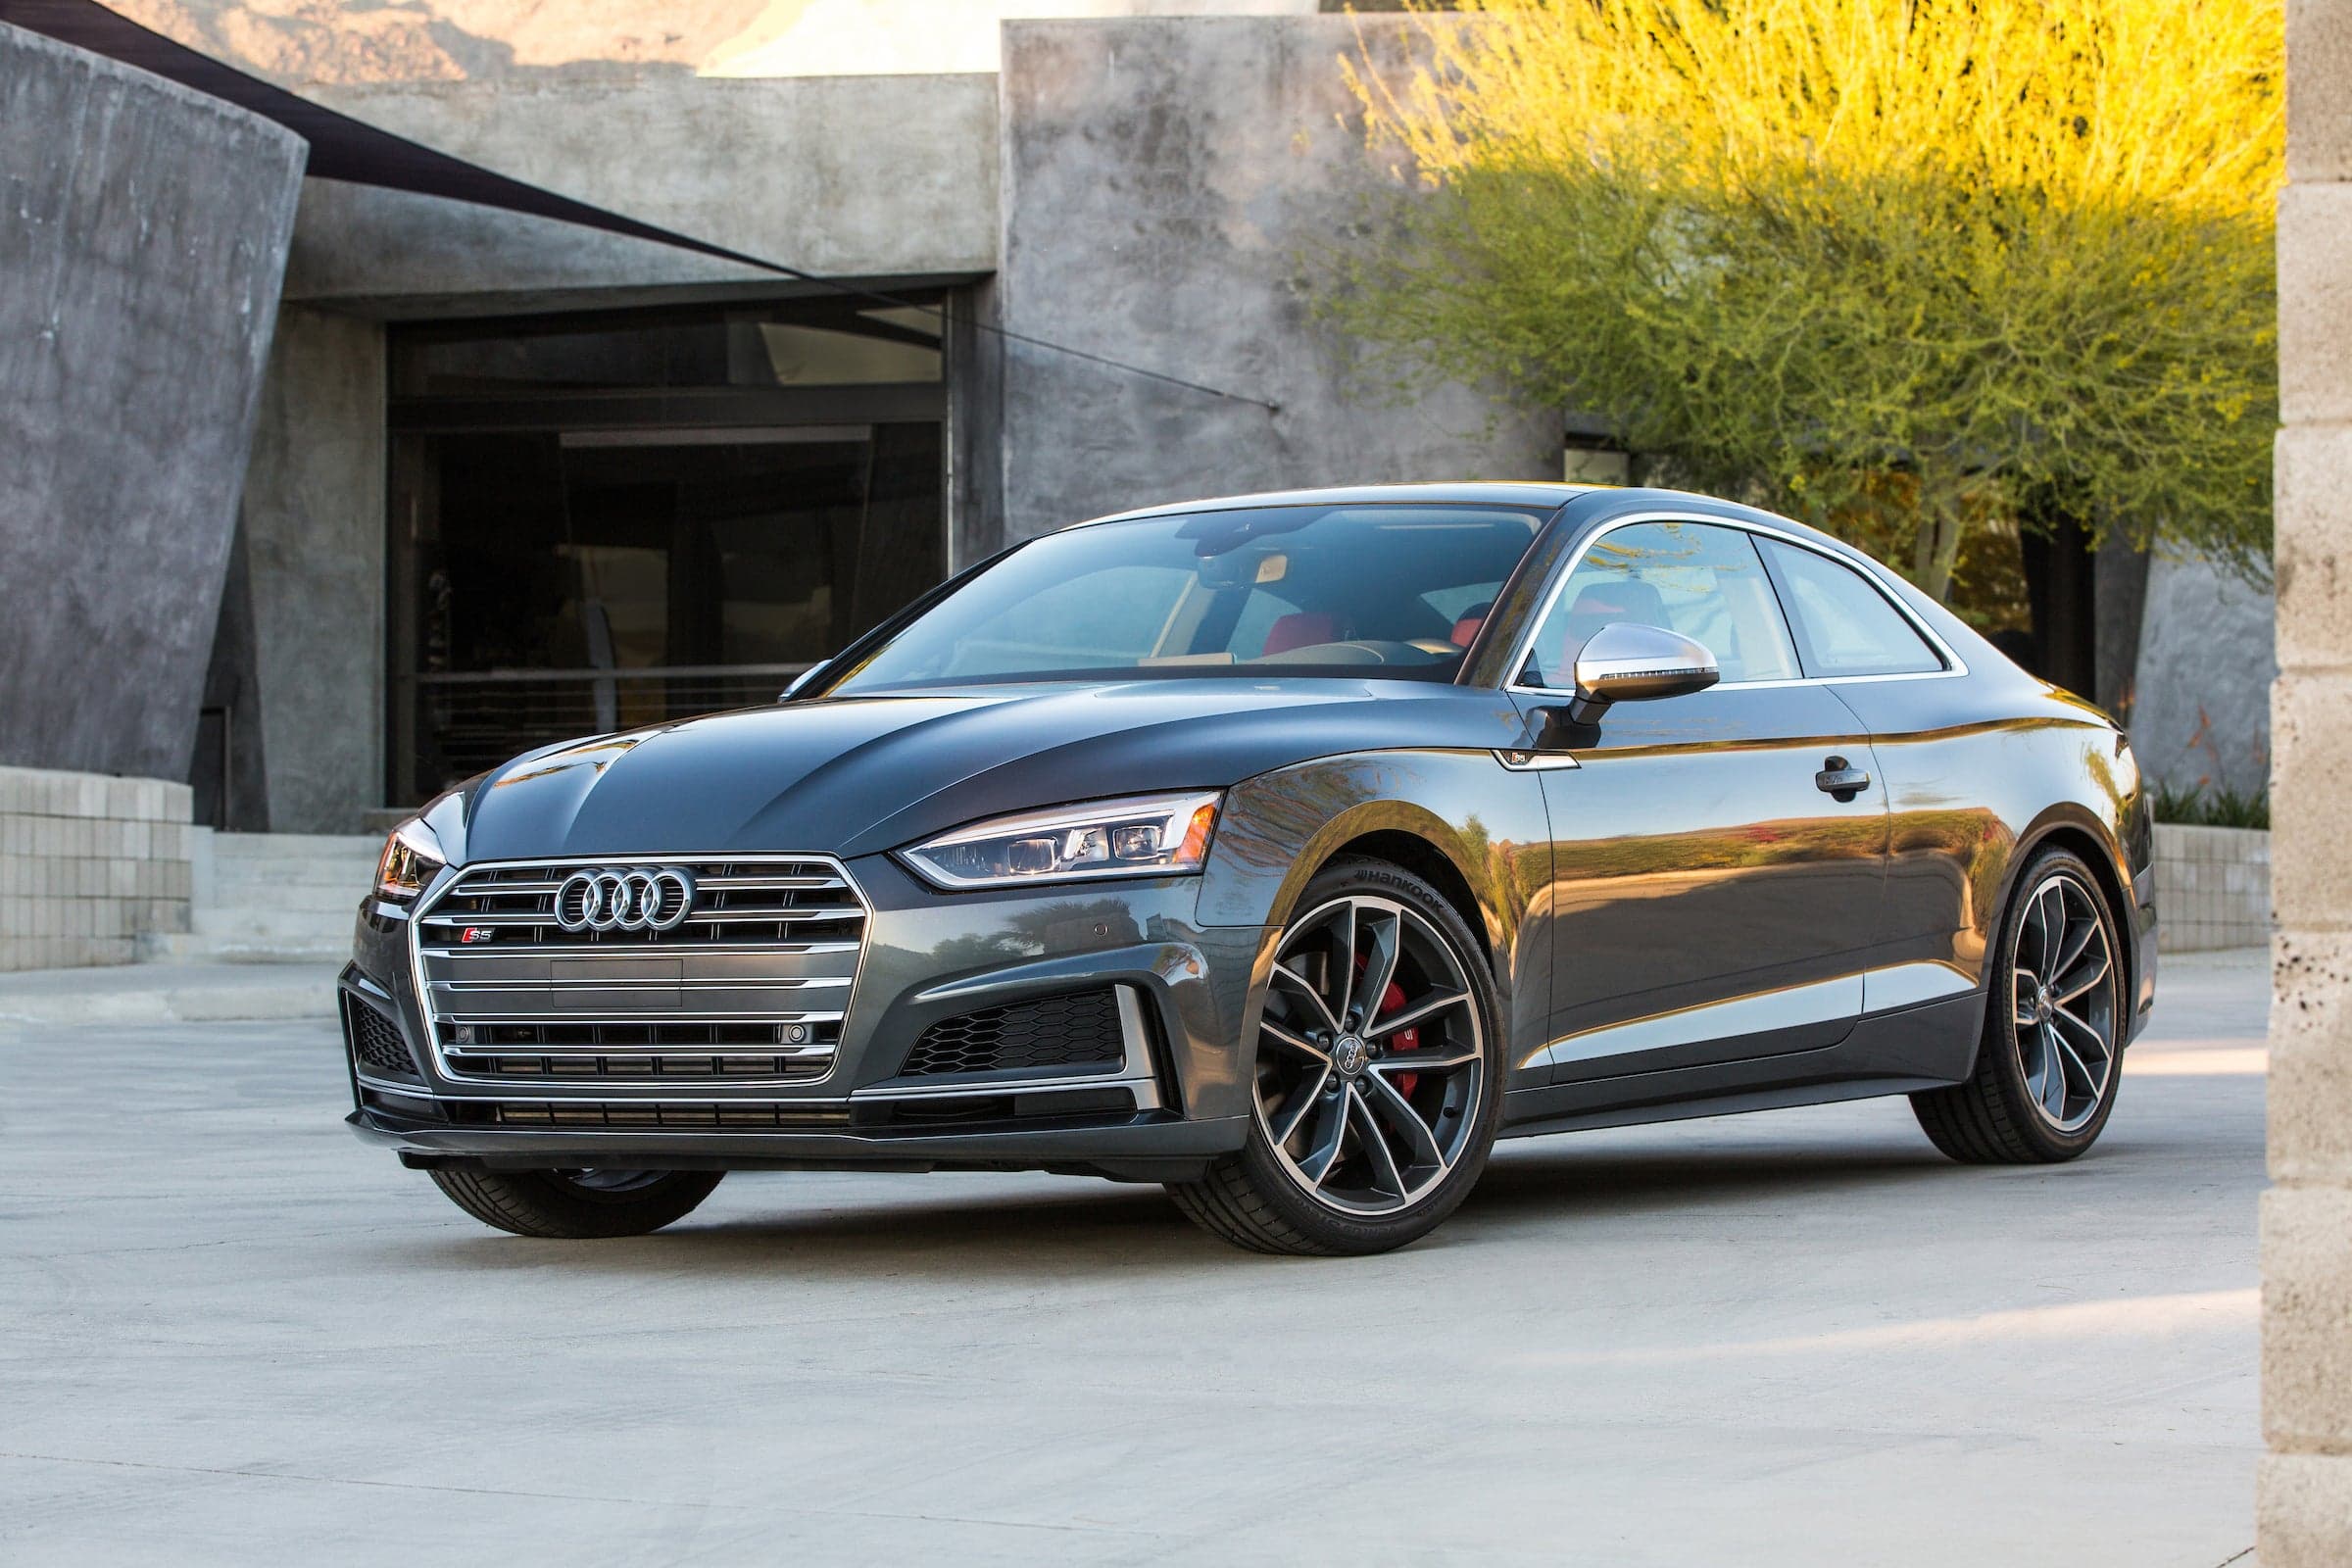 The 2018 Audi S5 Is the Smartest, Quickest Coupe You’ll Barely Notice